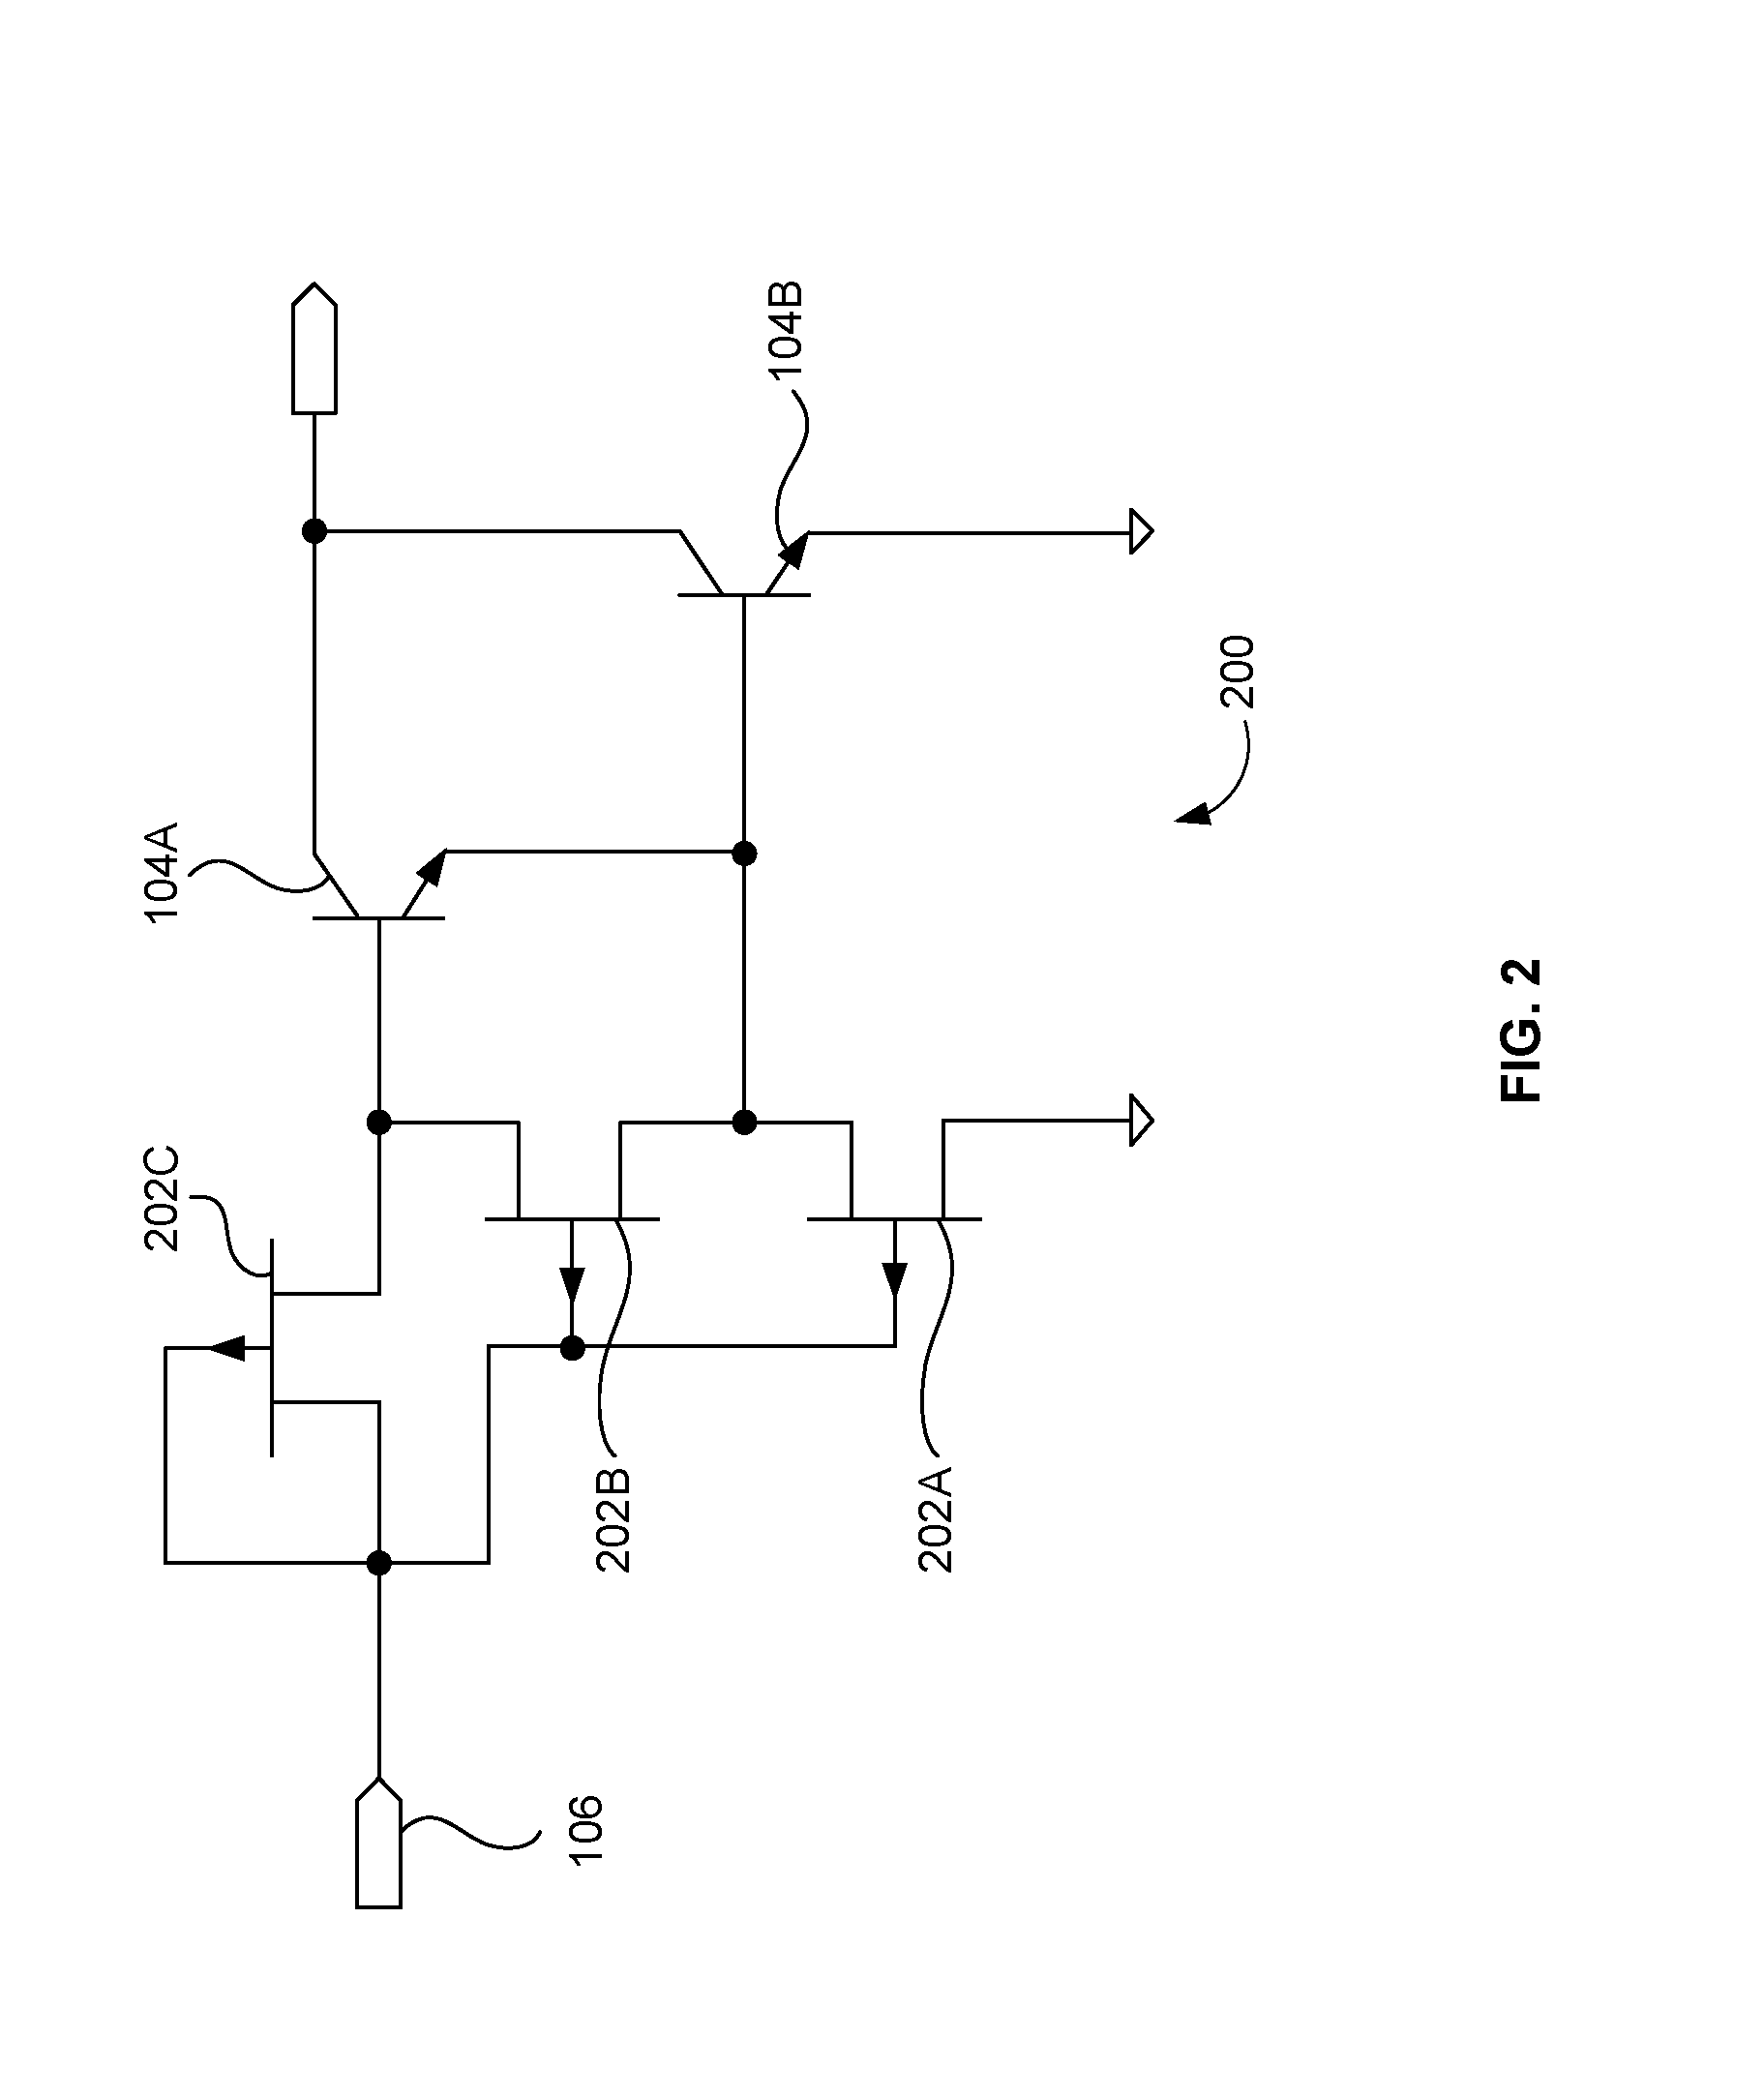 Configuration of jfet for base drive bipolar junction transistor with automatic compensation of beta variation